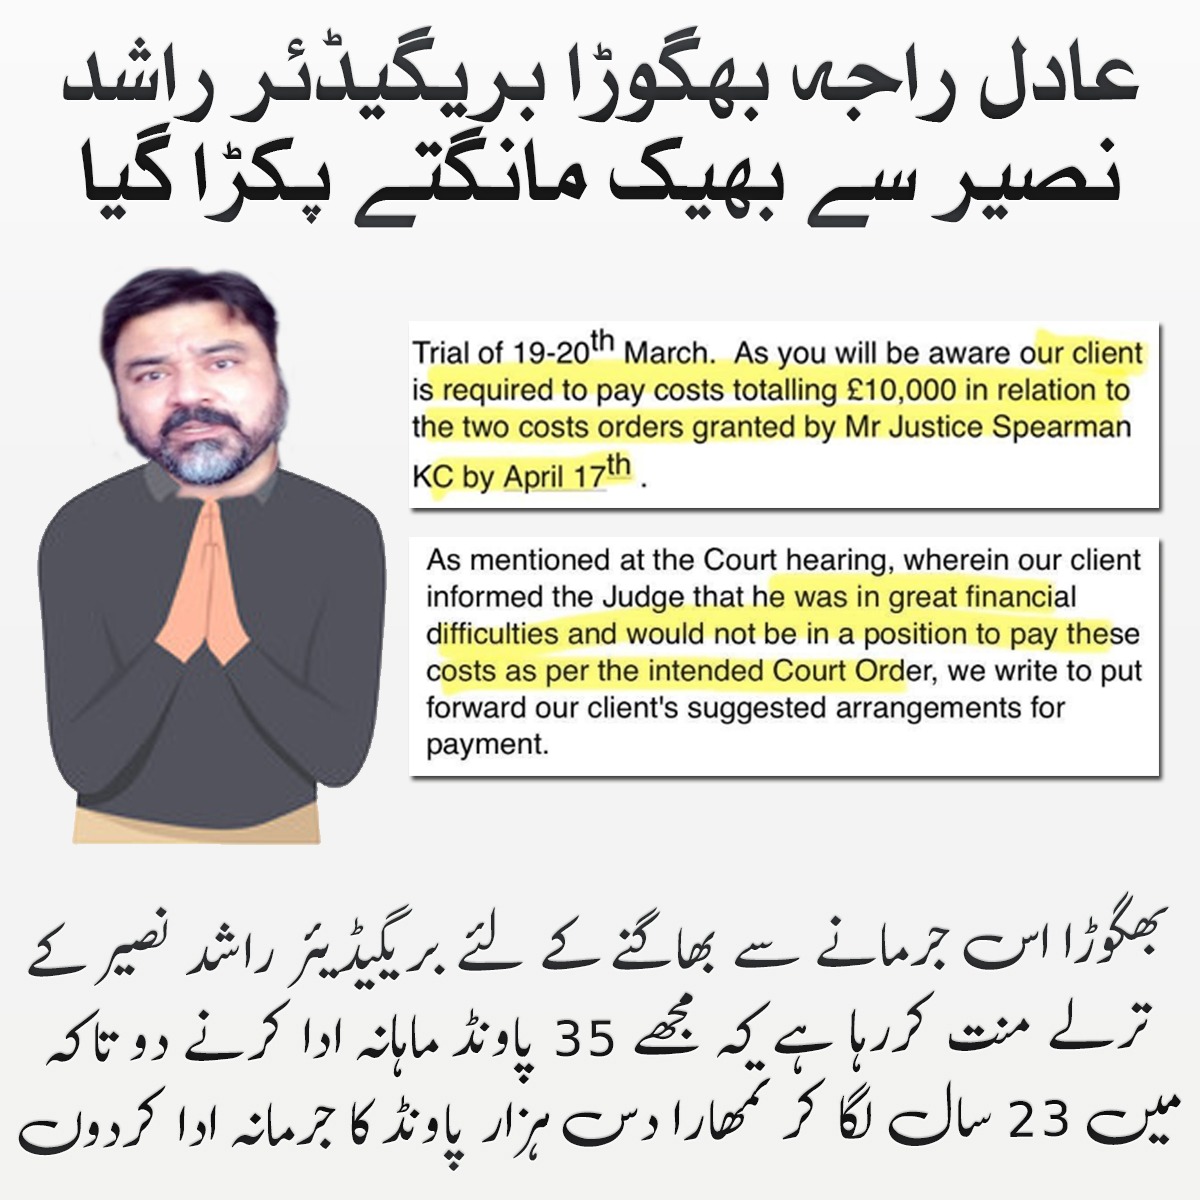 In order to escape this fine, this fugitive is begging Brigadier Rashid Naseer to pay me 35 pounds per month so that I can spend 23 years to pay your fine of ten thousand pounds.

 #عادل_بھگوڑا_وڑگیا